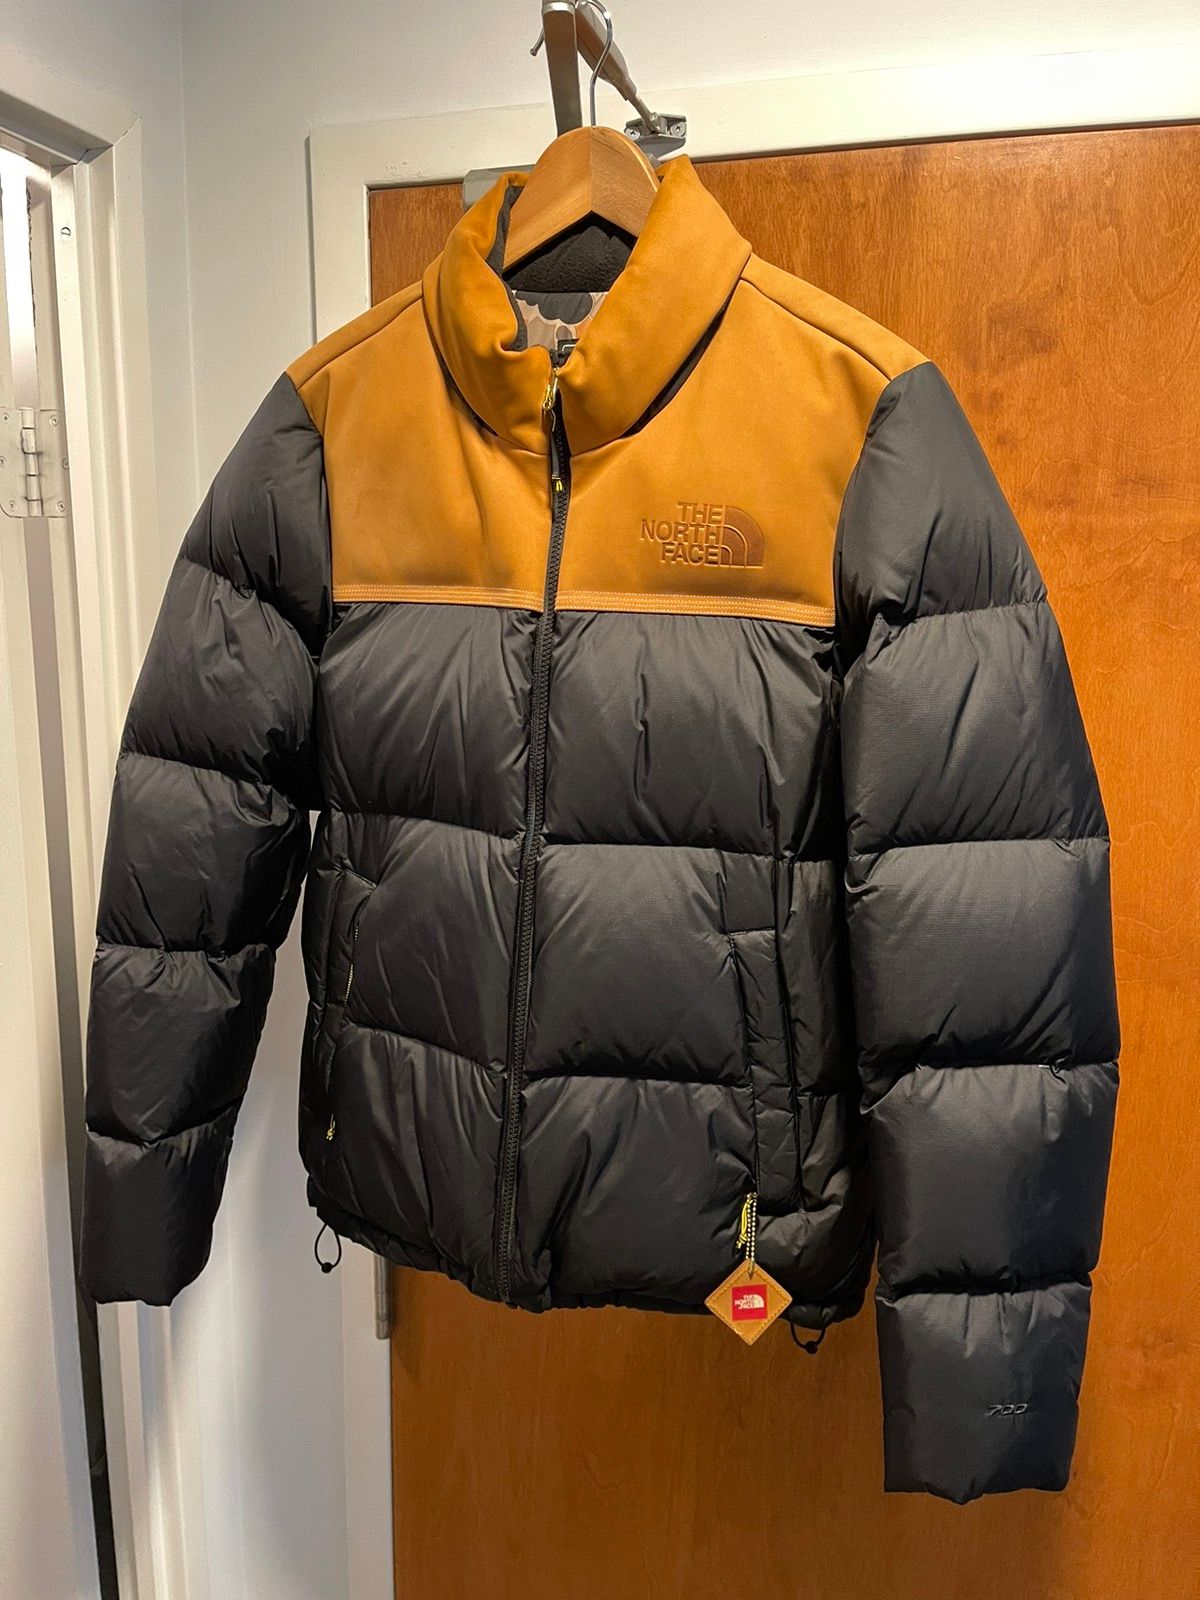 Timberland The North Face x Timberland Nuptse Jacket | Grailed